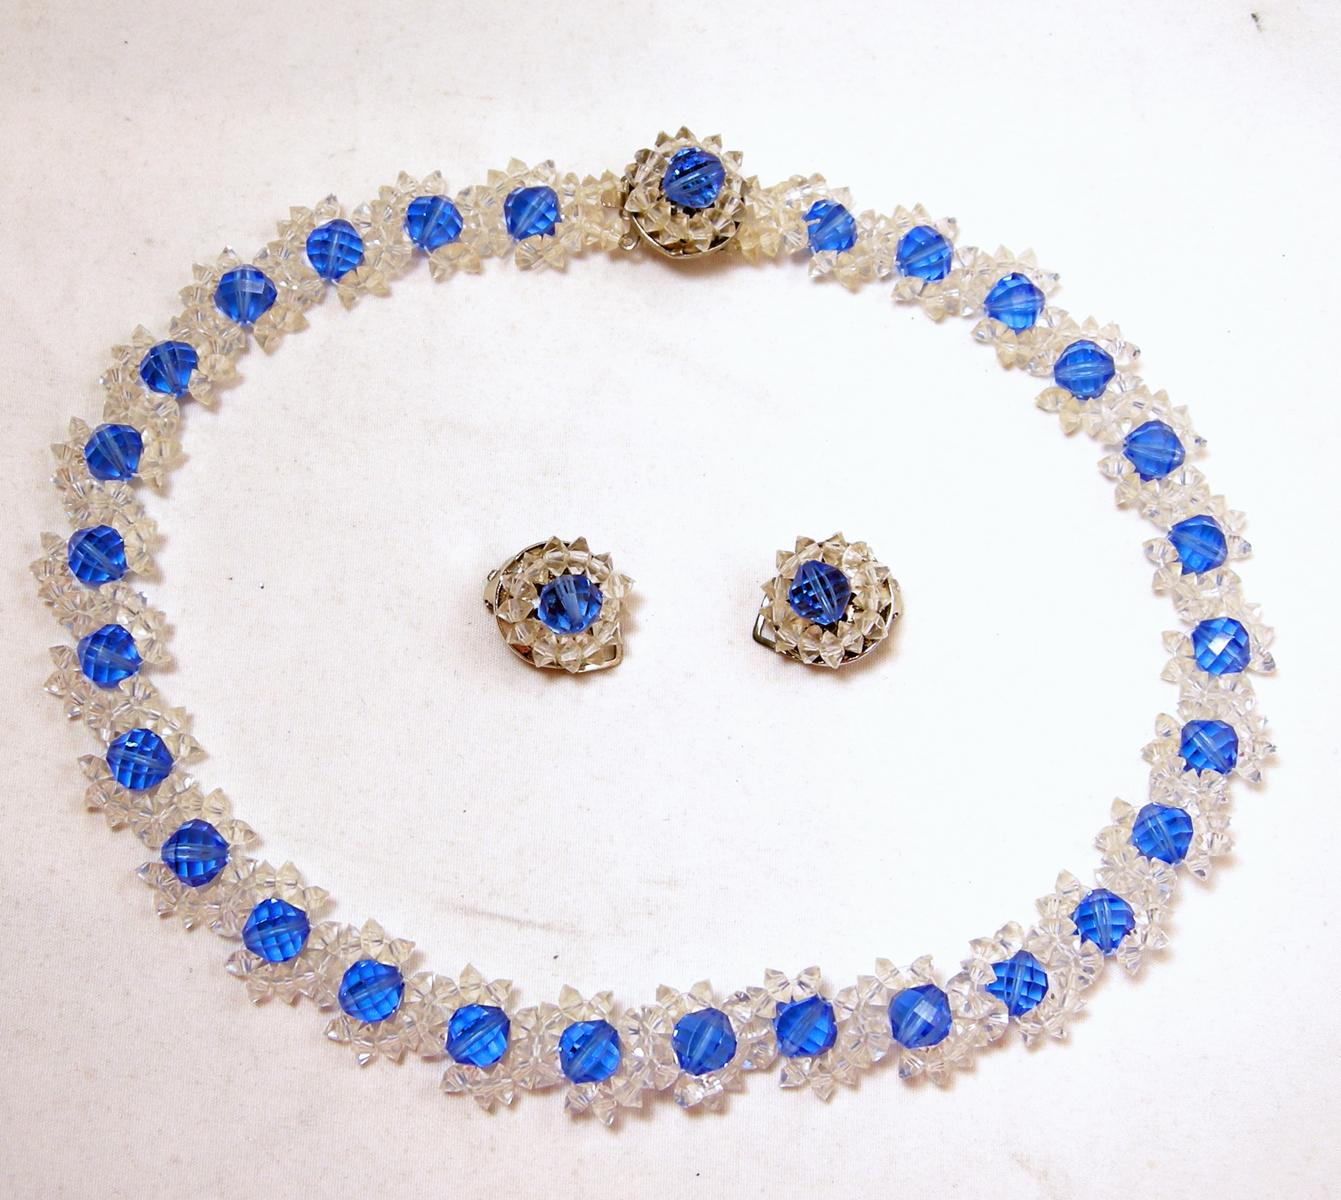 This 1940s vintage necklace & earrings set has clear glass beads going completely around the neck. Blue crystal beads are in the center of each glass link … in a silver tone setting.  In excellent condition, the necklace measures 17” x 5/8” with a